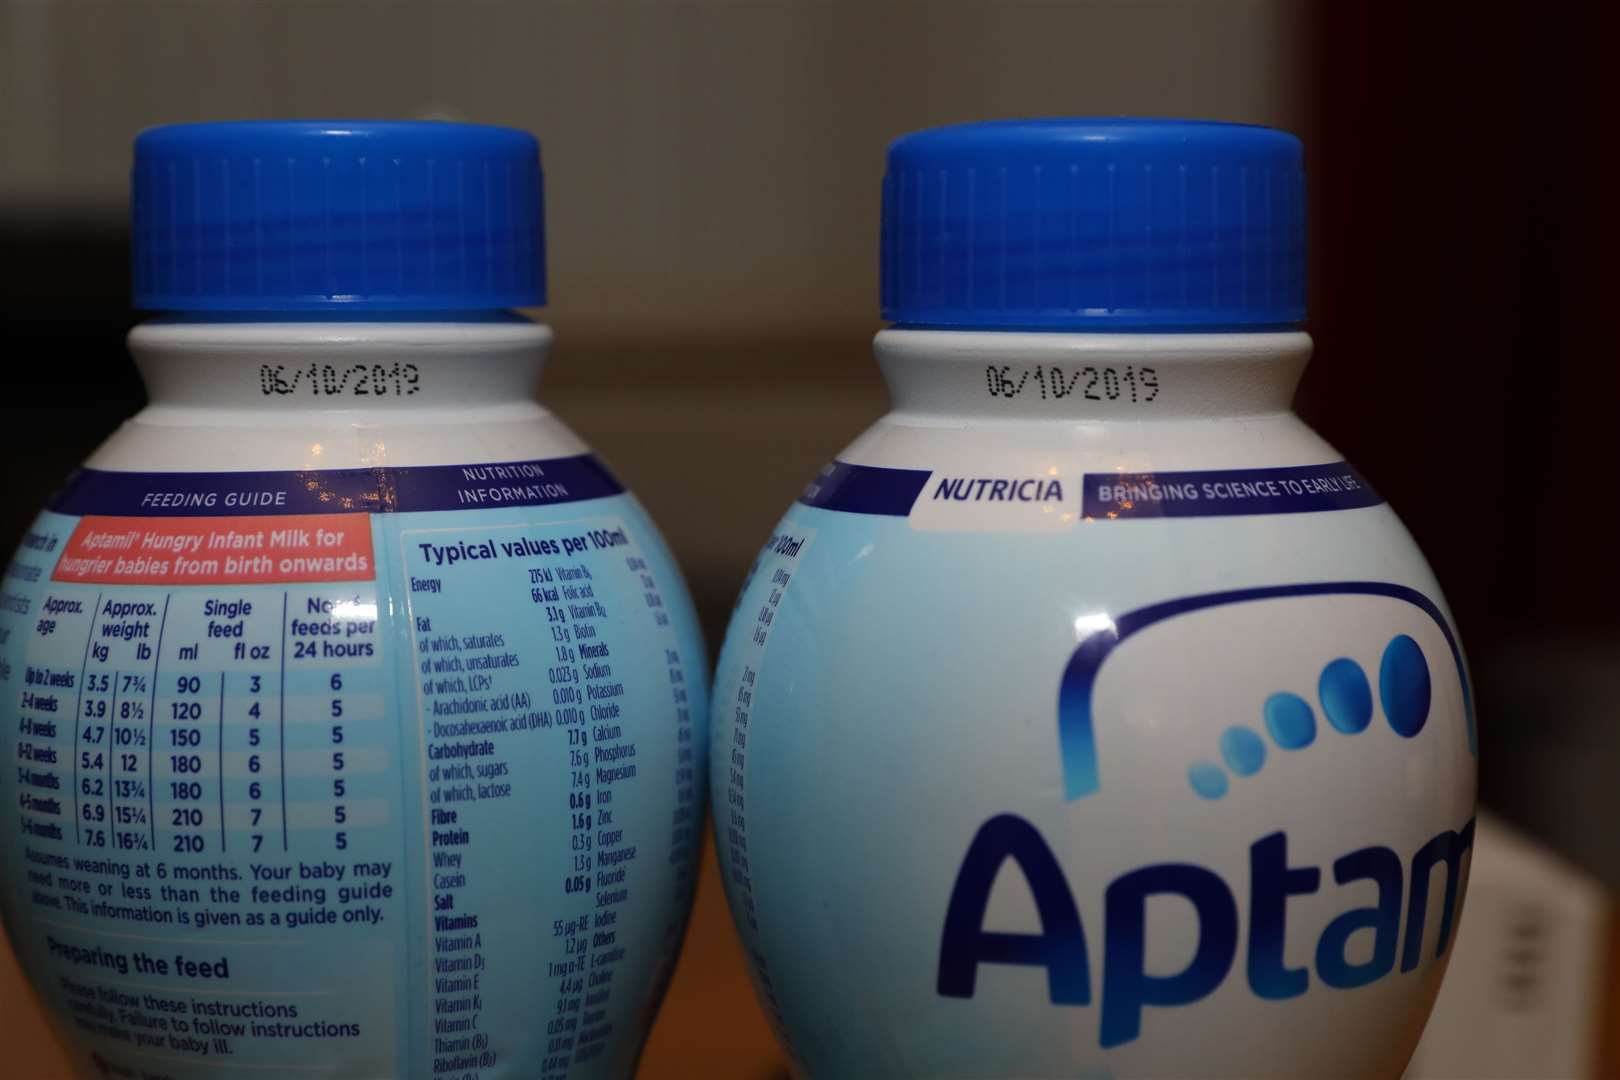 The baby milk was bought on November 4, but had a best-before date of October 6